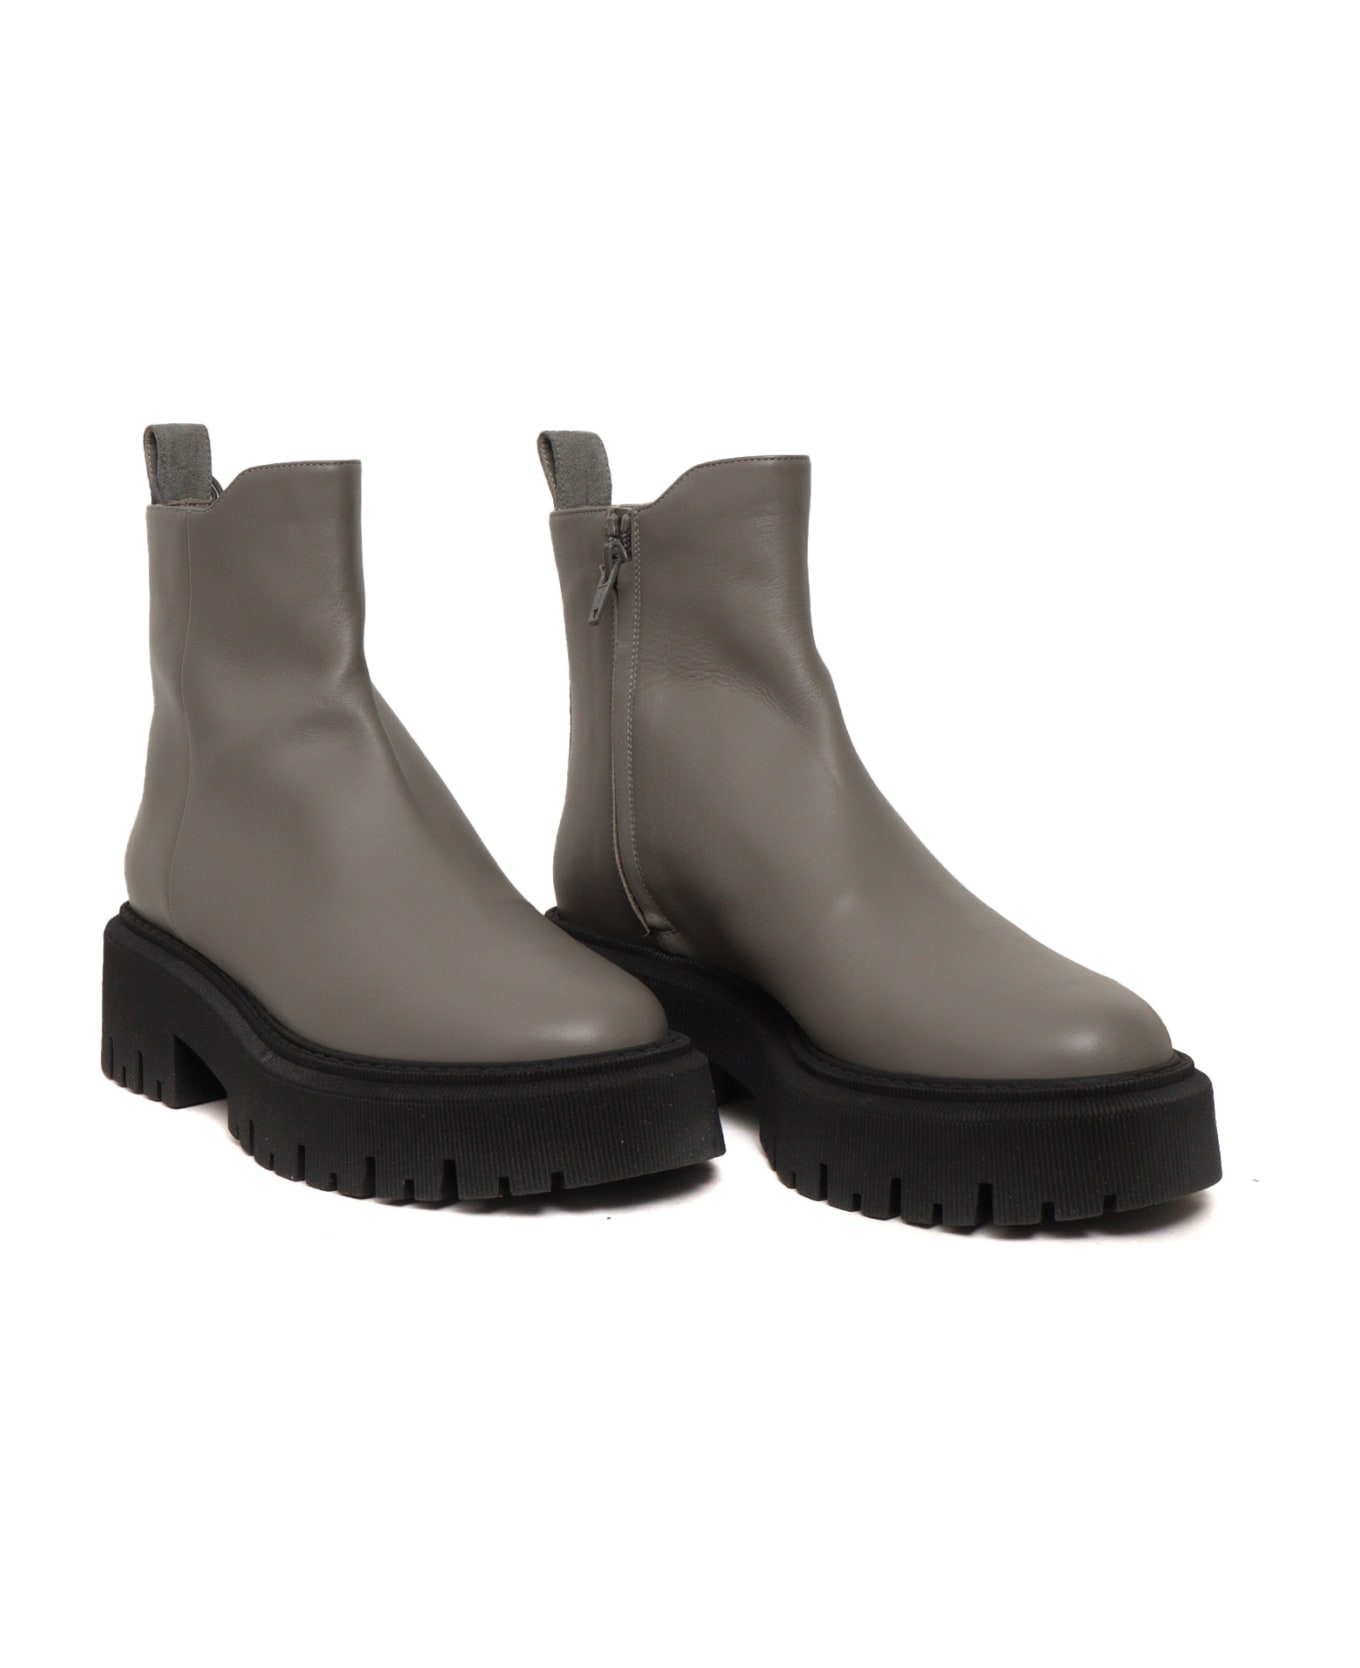 Lorena Antoniazzi Chunky Sole Ankle Boots - GREY